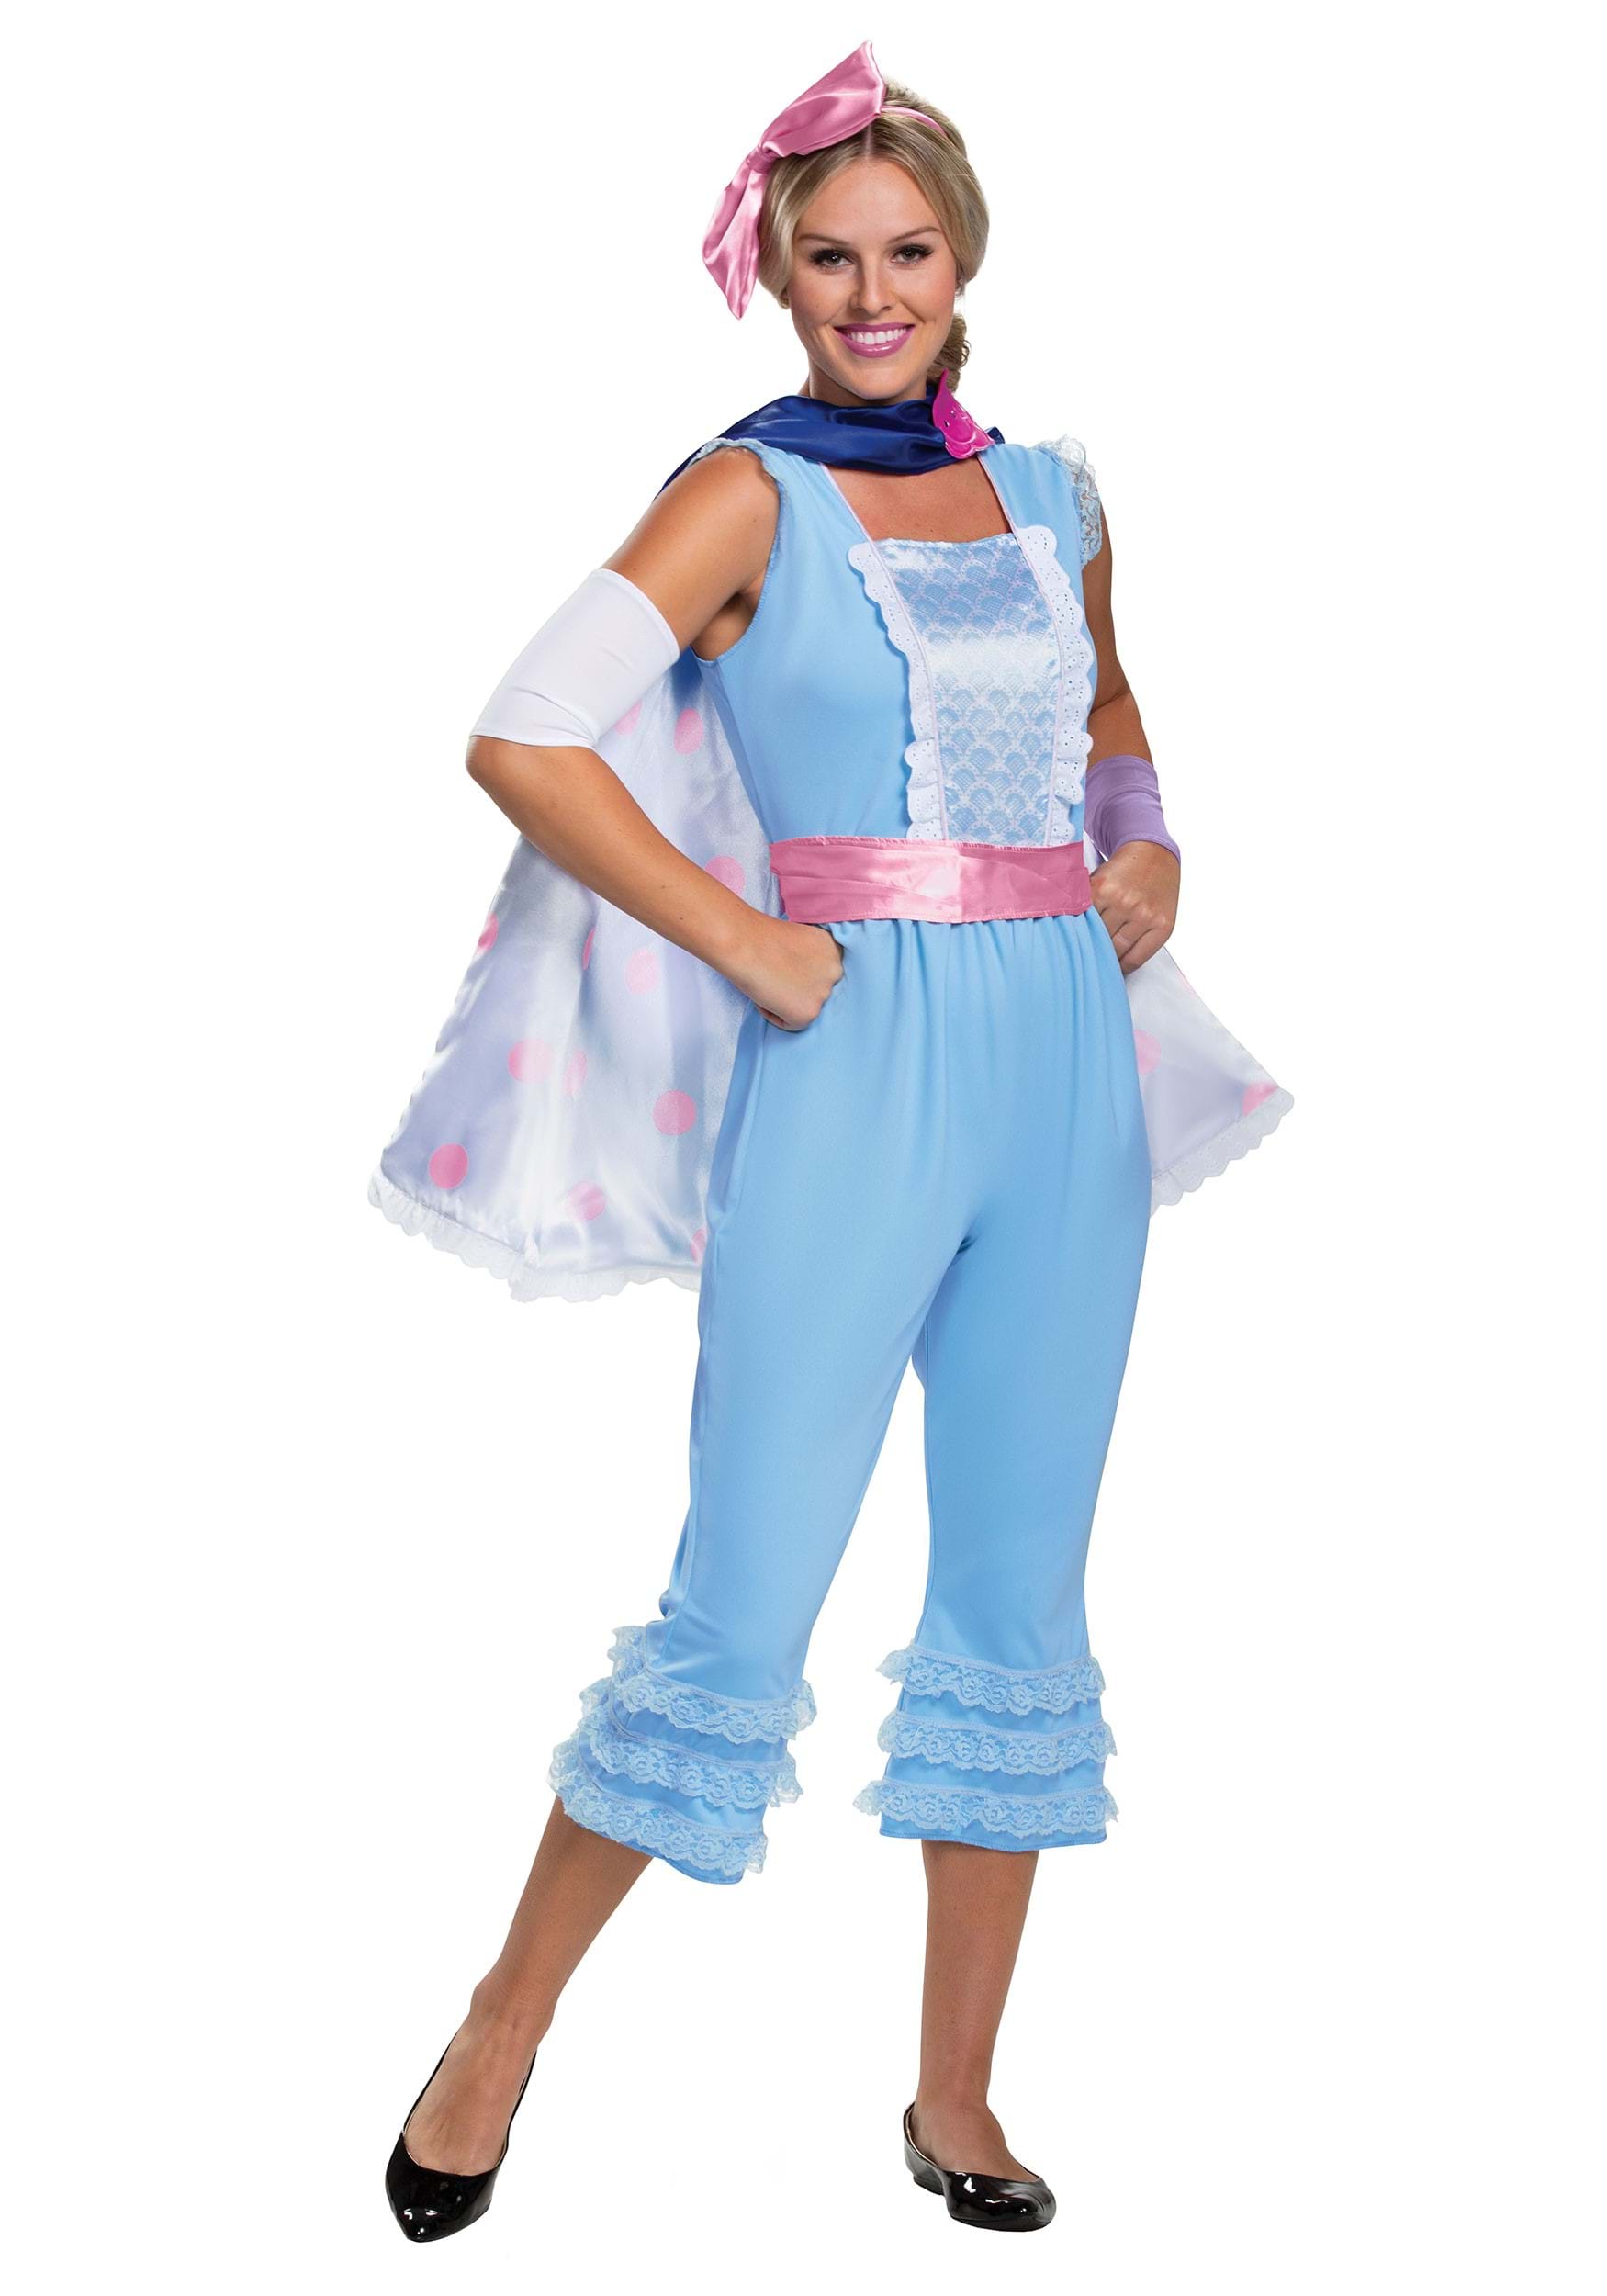 Photos - Fancy Dress Deluxe Disguise Women's Toy Story Bo Peep  Costume Pink/Blue/White 